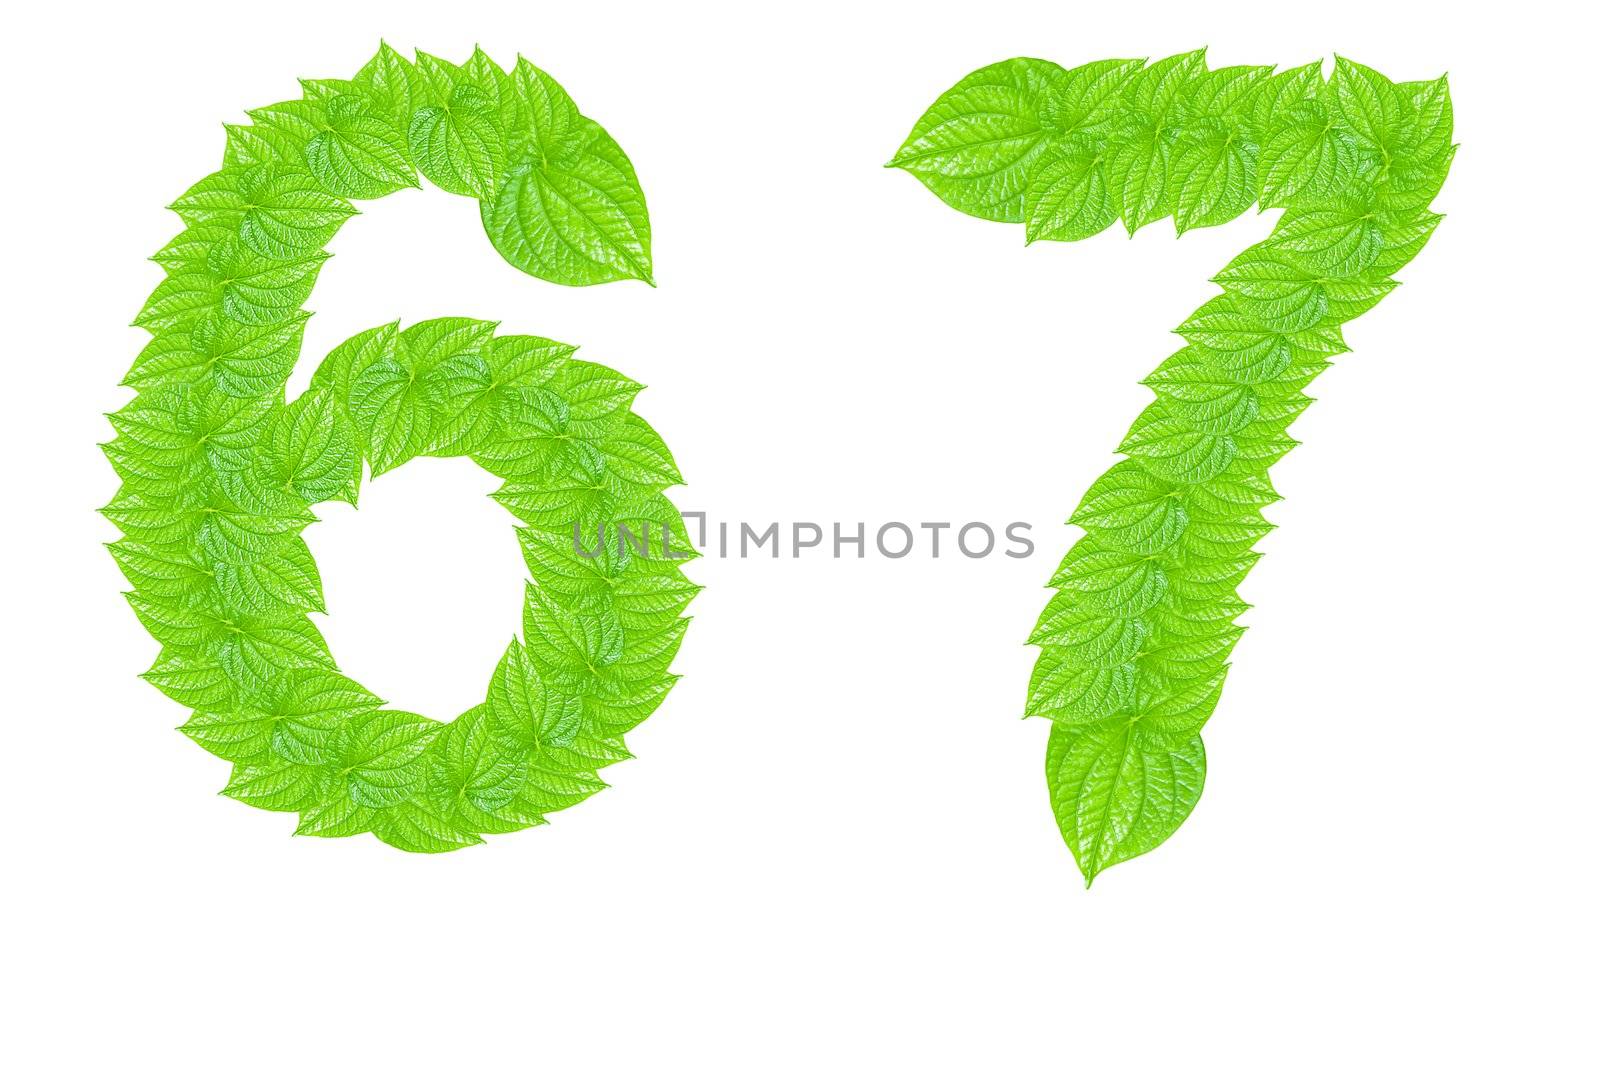 Number made from green leafs with number 6 to 7